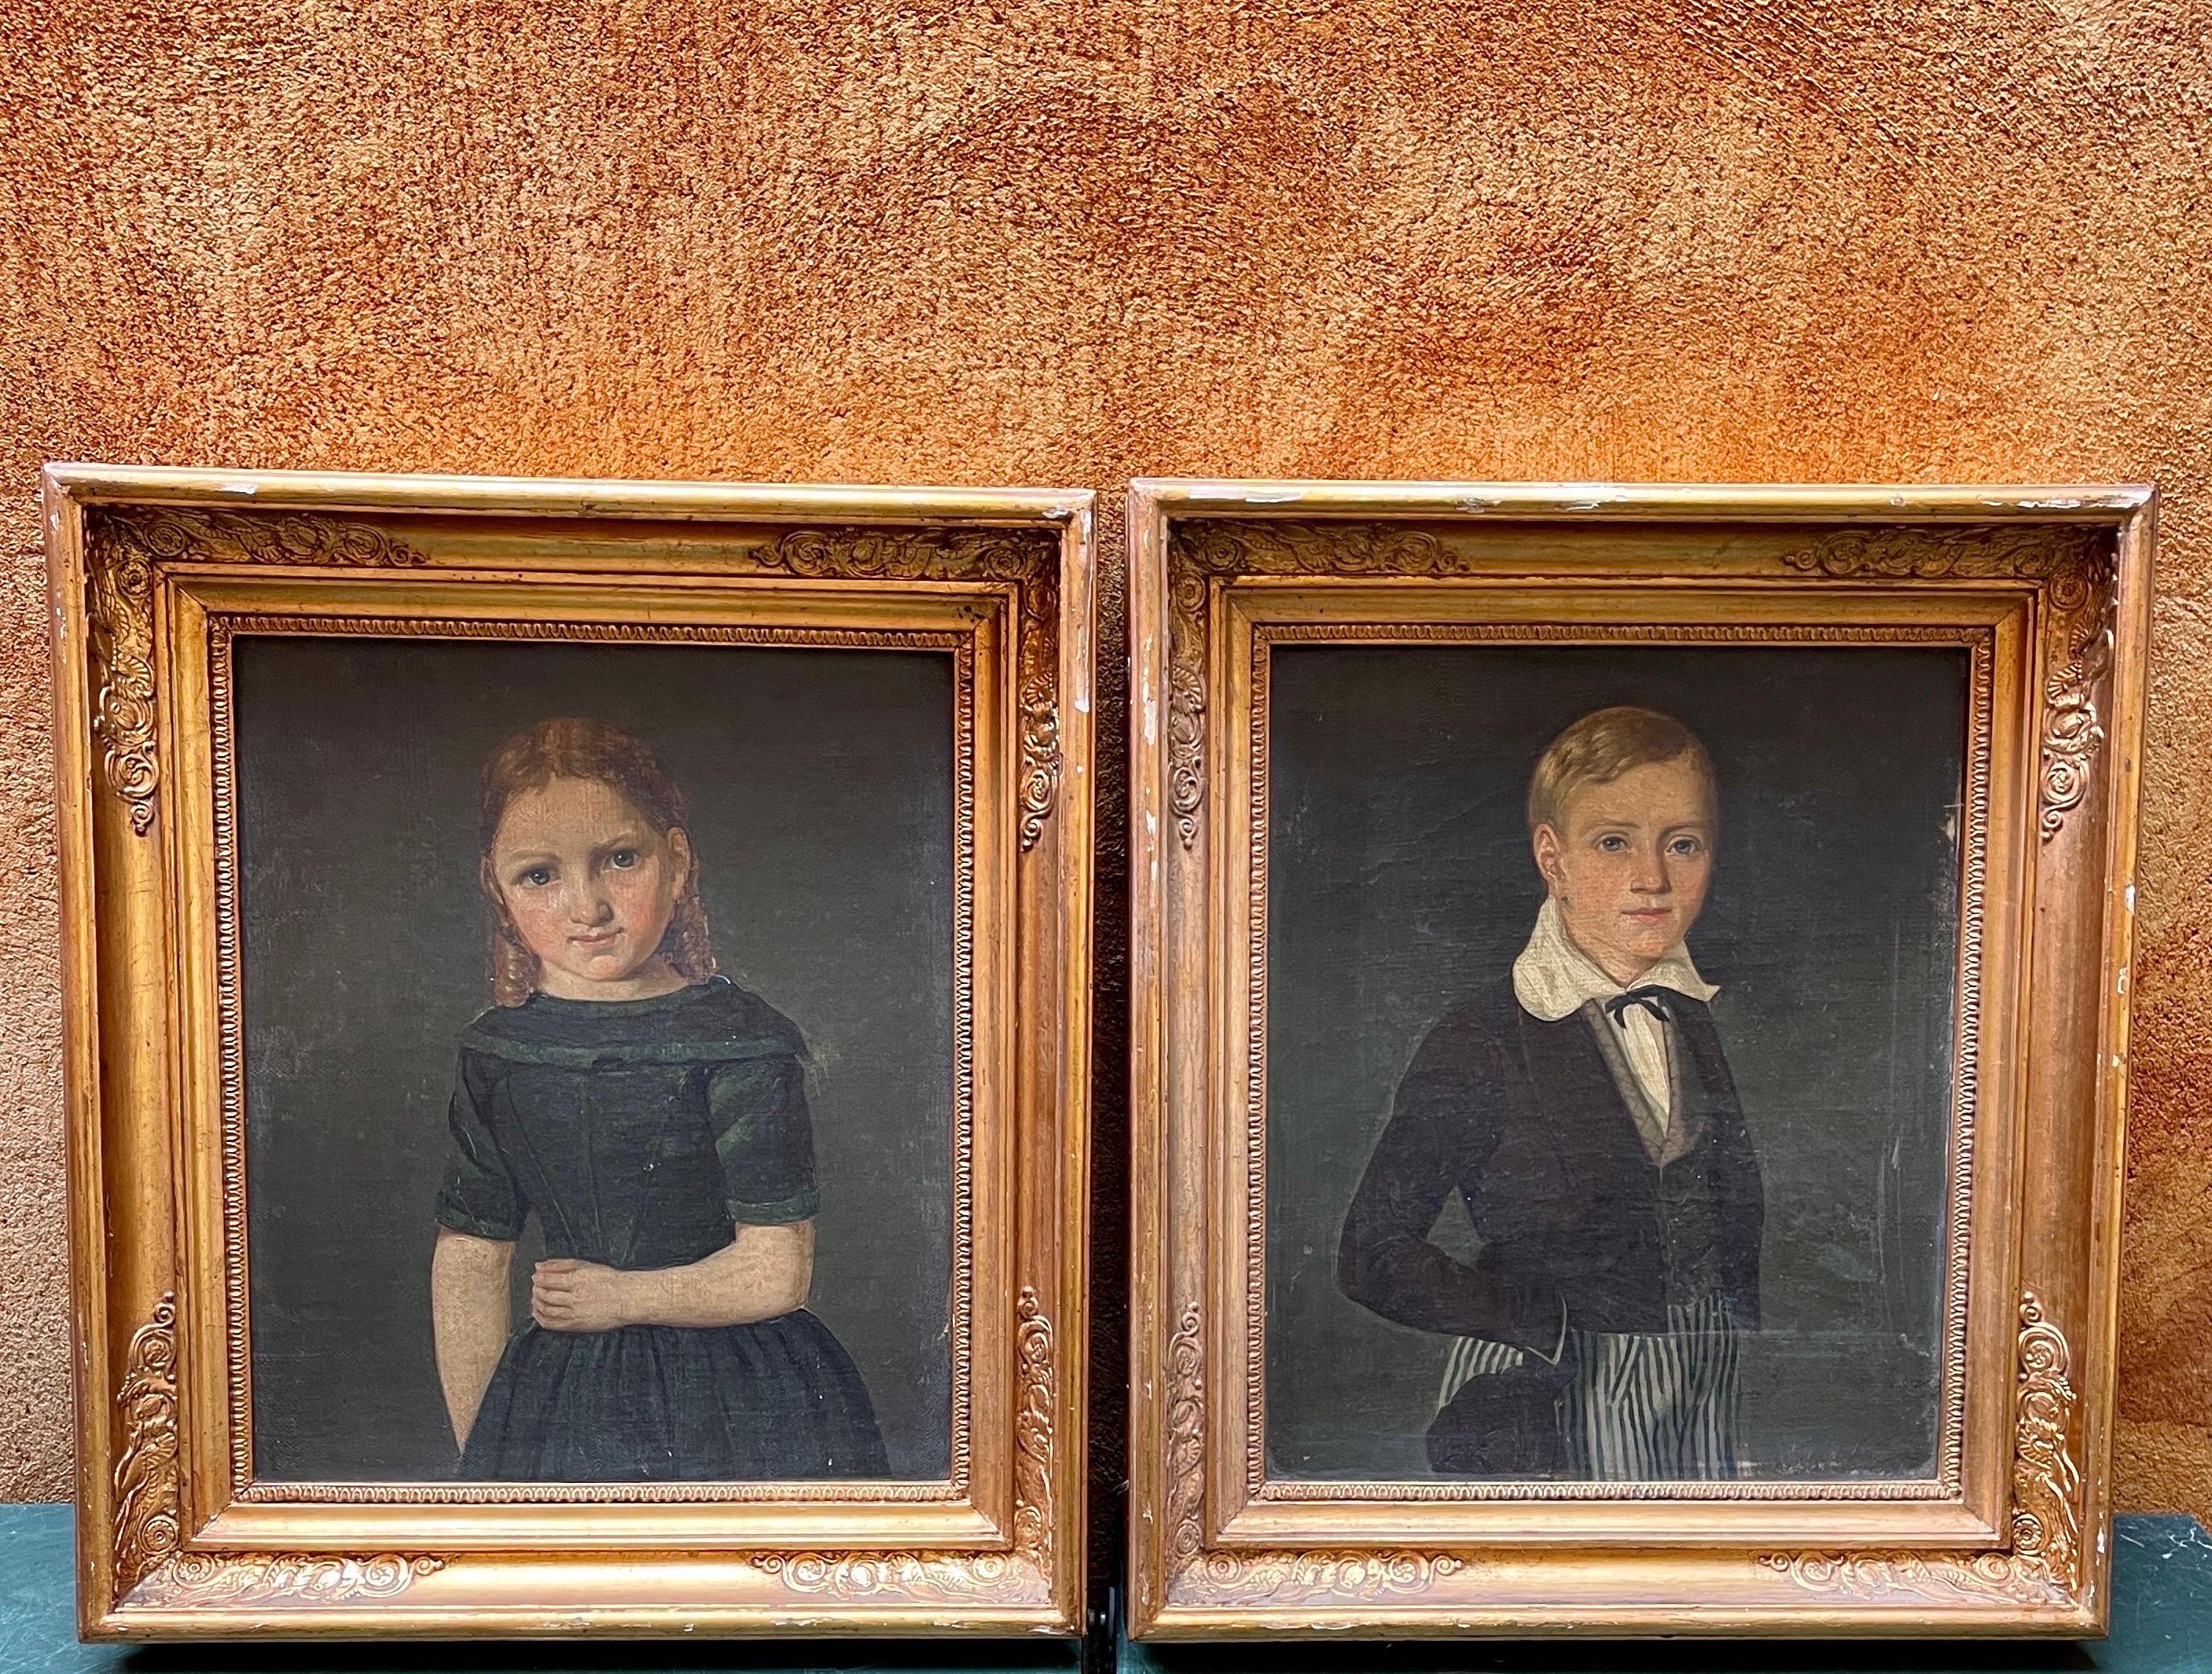 Pair of Danish Early 19th Century Children’s Portraits Oil on Canvas In Good Condition For Sale In Haddonfield, NJ